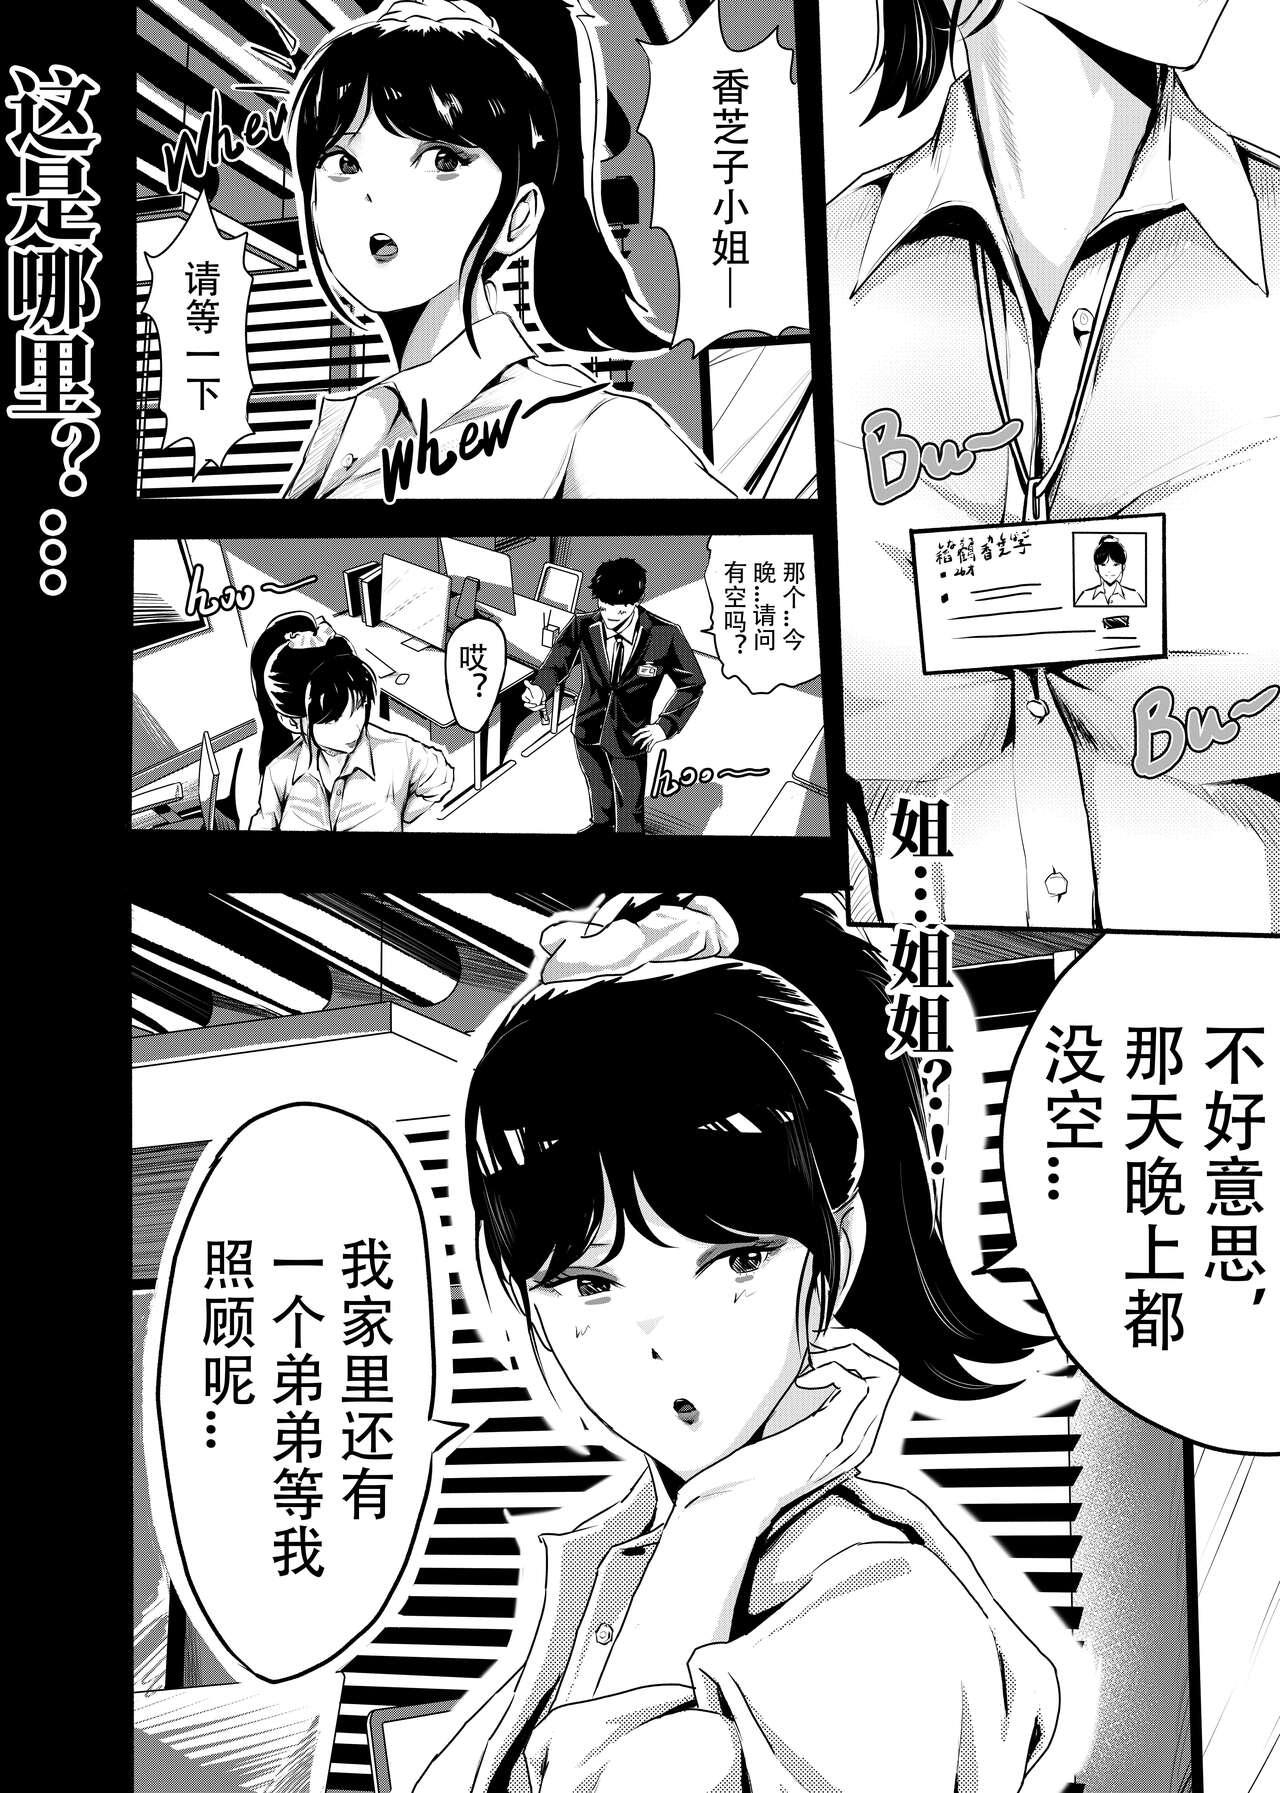 [KAO.YELLOW STUDIO (T.C.X)] I must be out of my mind to fall in love with SAORI, the Snuff Queen Ch.1-16 | 想与冰恋女王纱织同学谈恋爱的我脑子一定有问题 第1-16话 [Chinese] 217